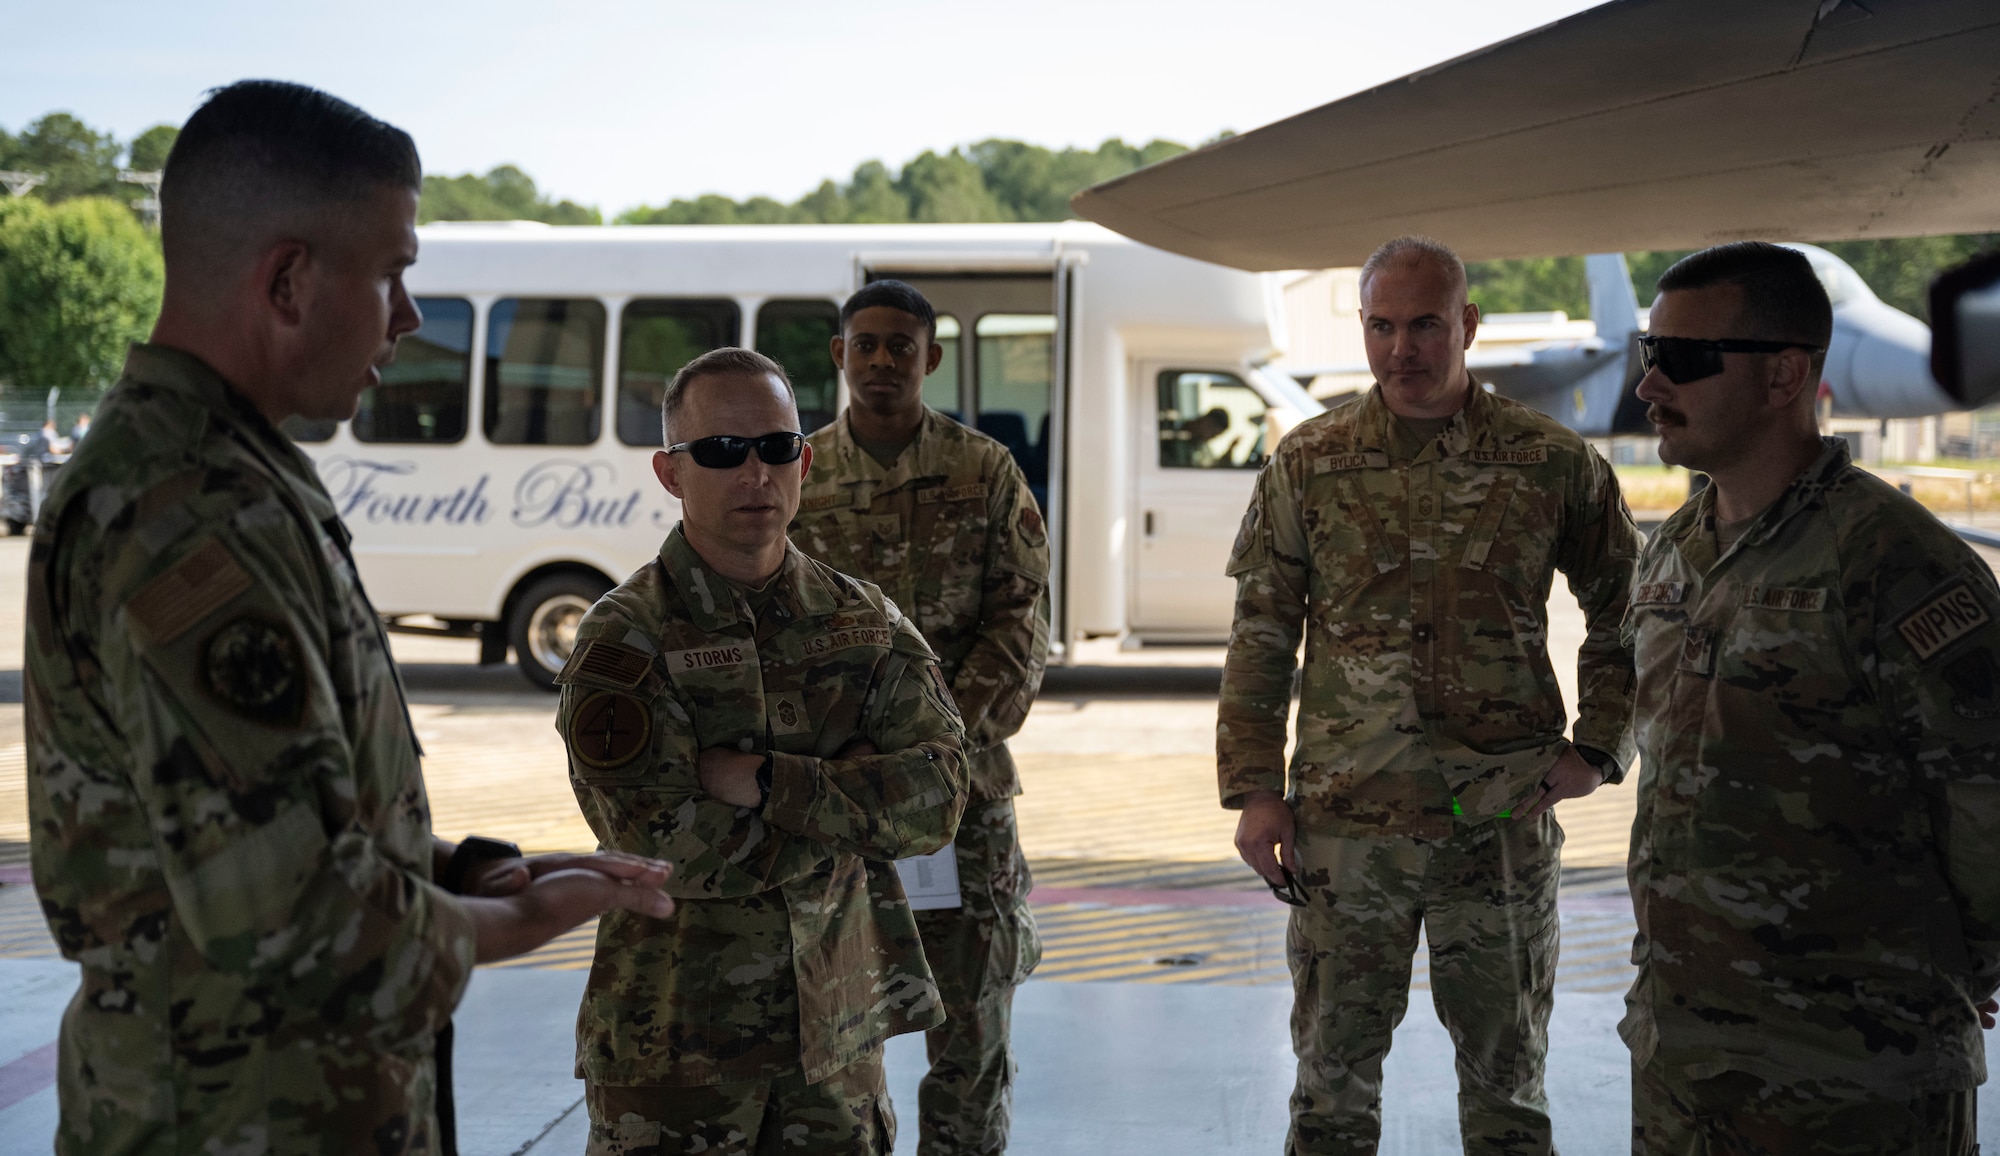 During the visit, members of the 4th FW provided Storms with a first-hand look at how Seymour Johnson develops professional Airmen ready to produce and project agile combat airpower for America.